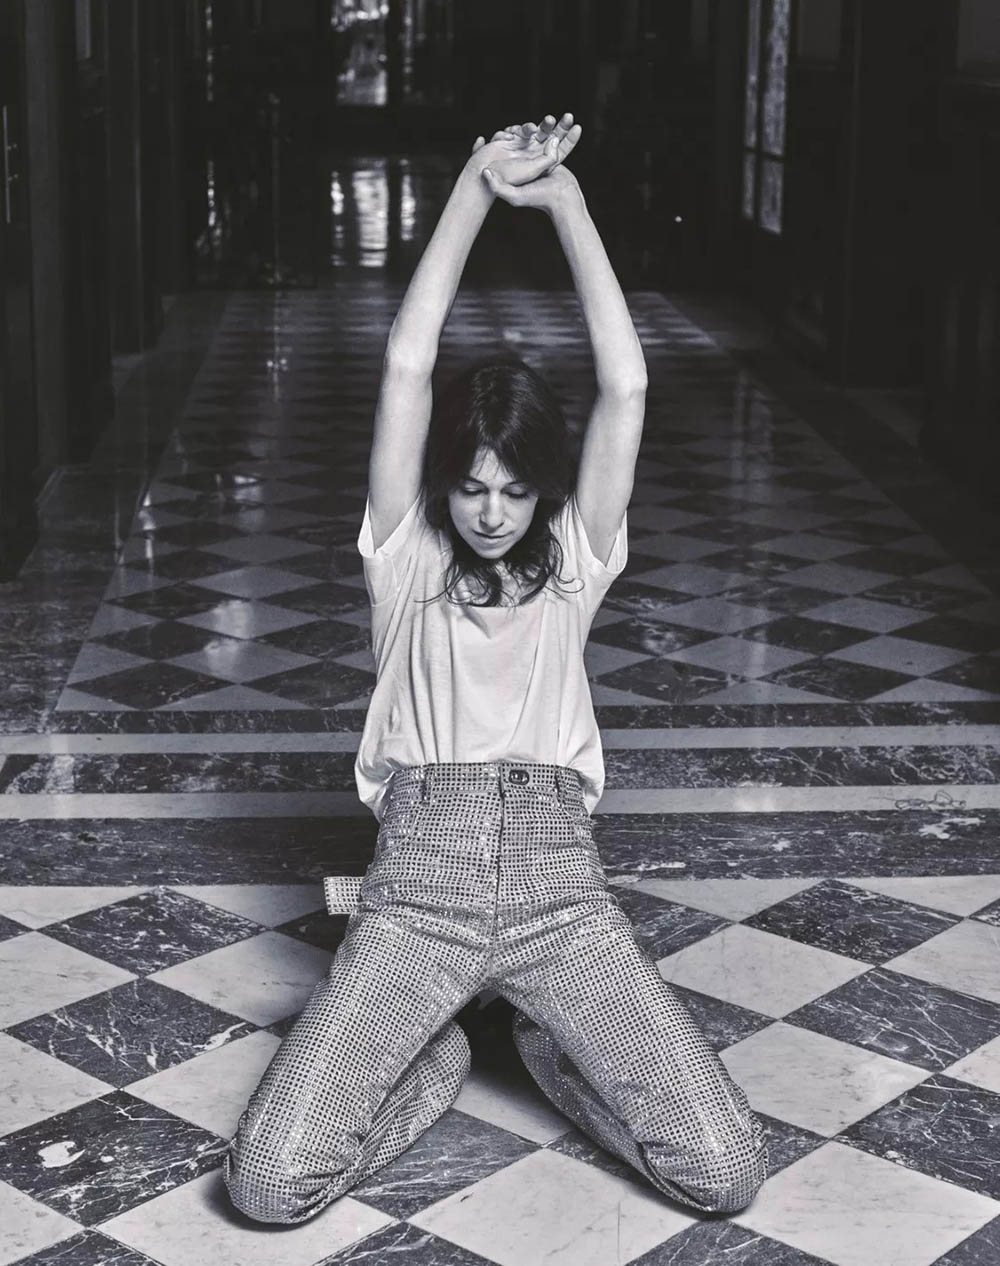 Charlotte Gainsbourg covers Madame Figaro January 15th, 2021 by Dant Studio - H&K